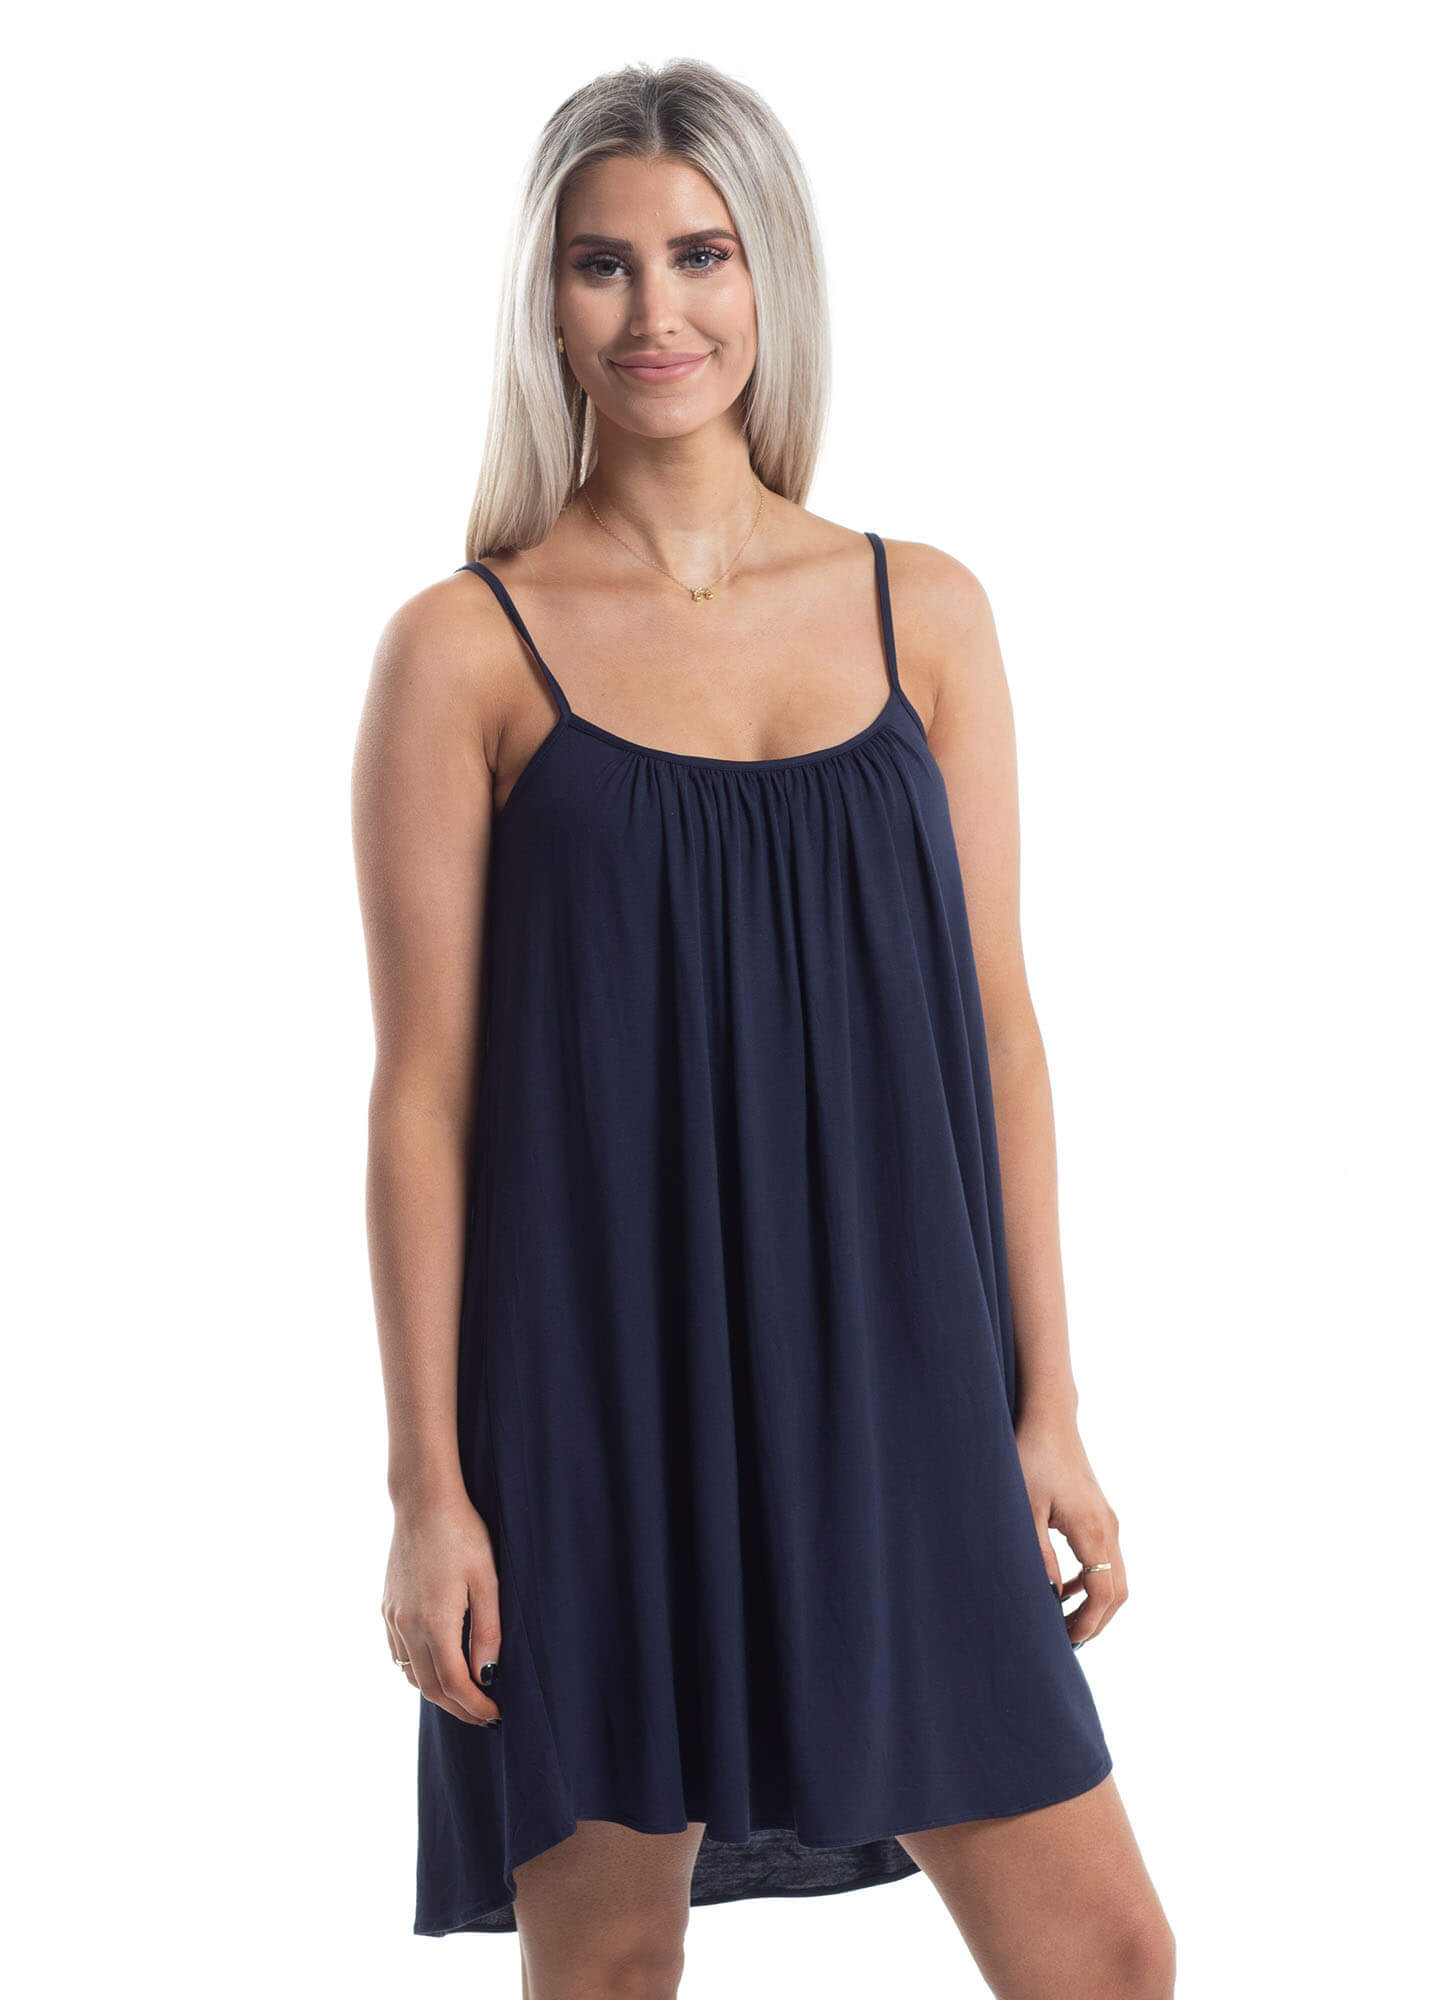 Discover Dreamy Comfort with Our Best-Selling Nightgown